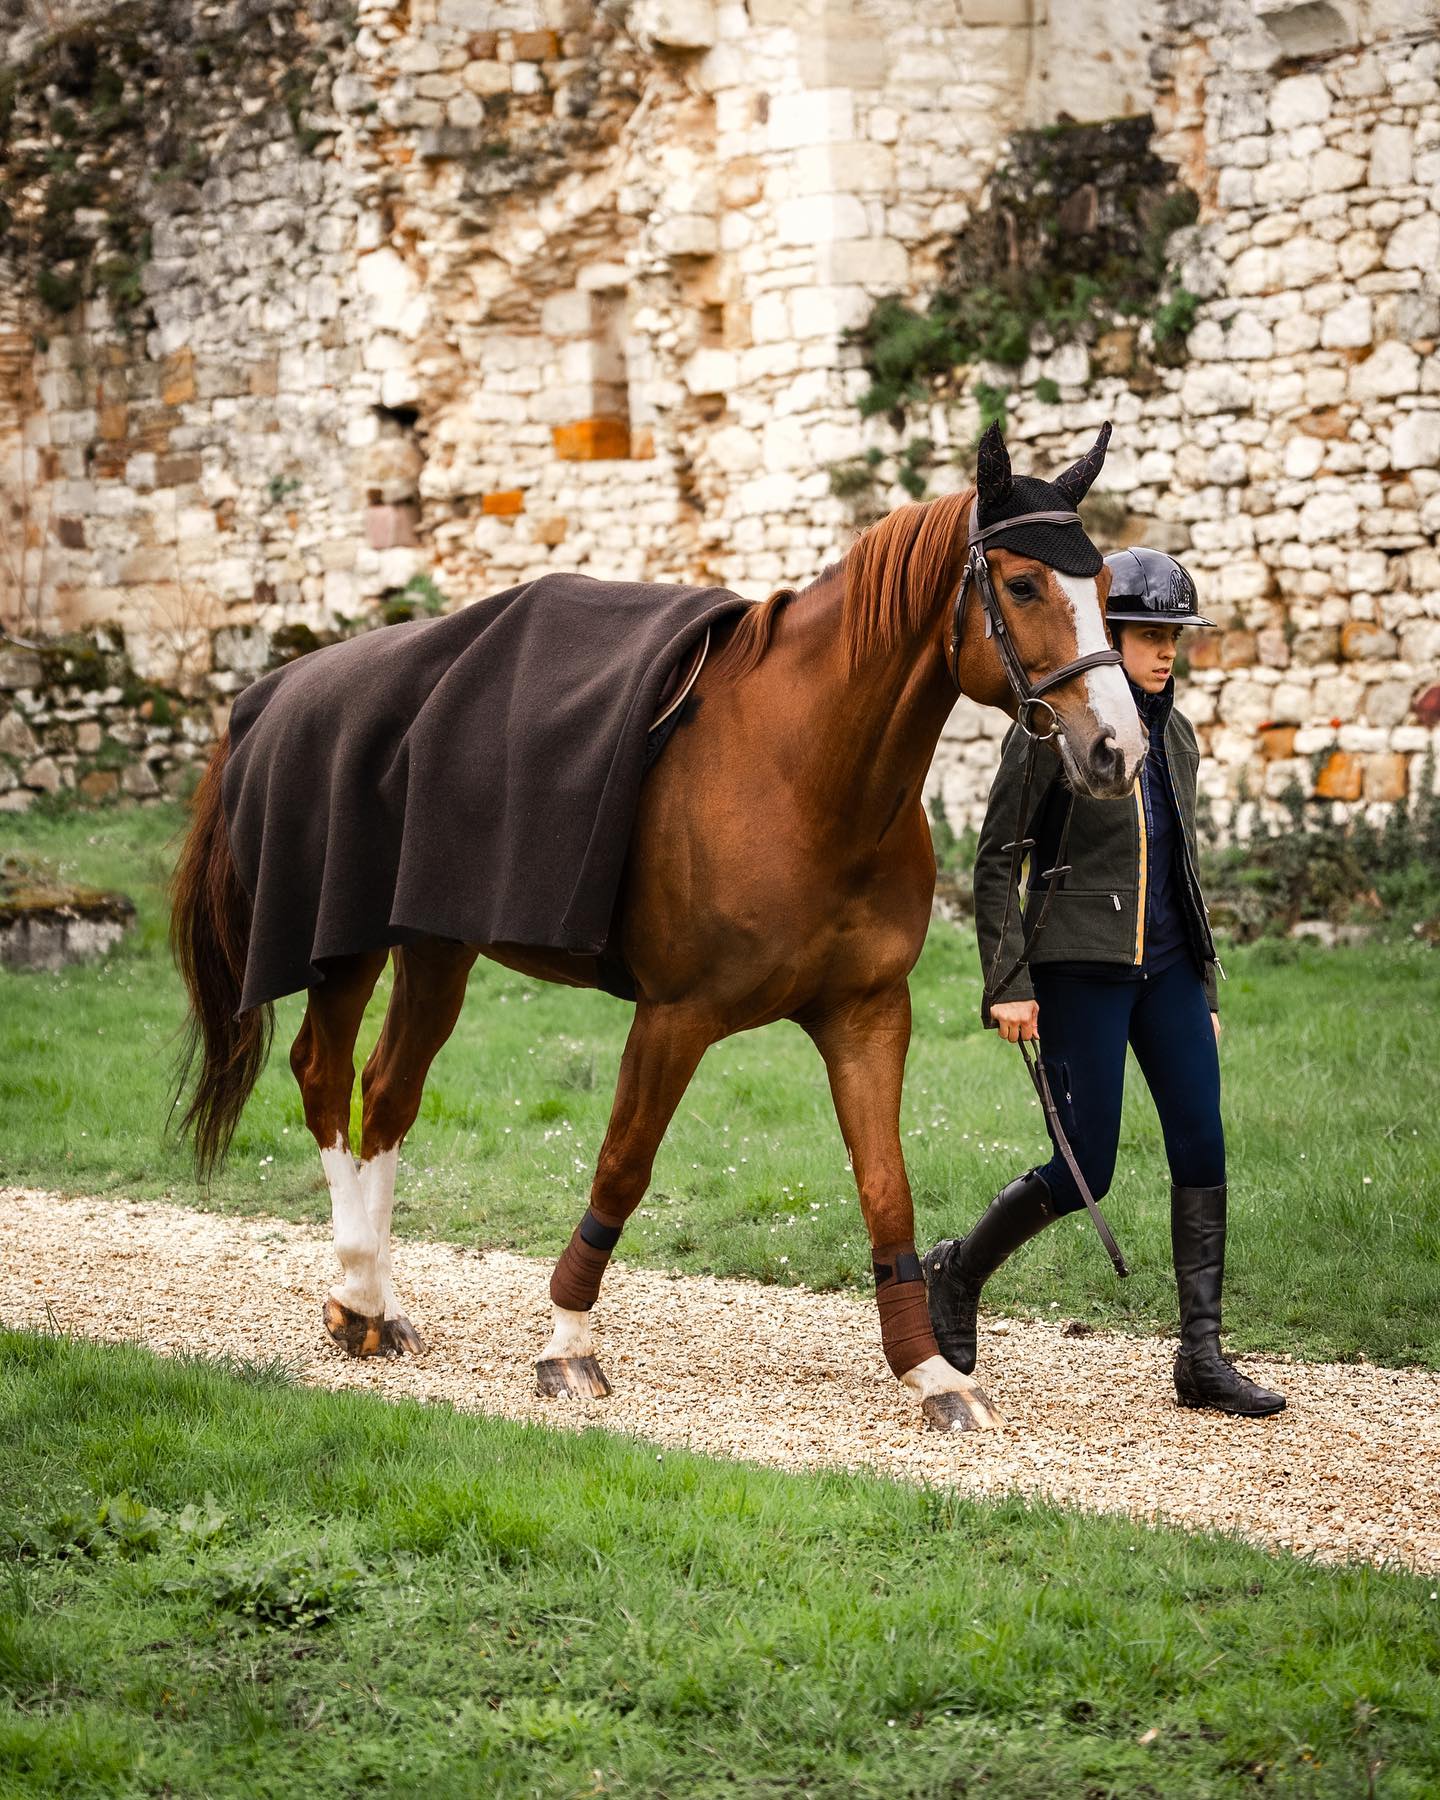 Ready to go 
📸 @hpalprod 
//
#tacante #madeinfrance #ecoresponsable #laine #wool #rug #couvrereins #carredelaine #couverturecheval #equestrianlife #equestrianstyle #equestrianoutfit